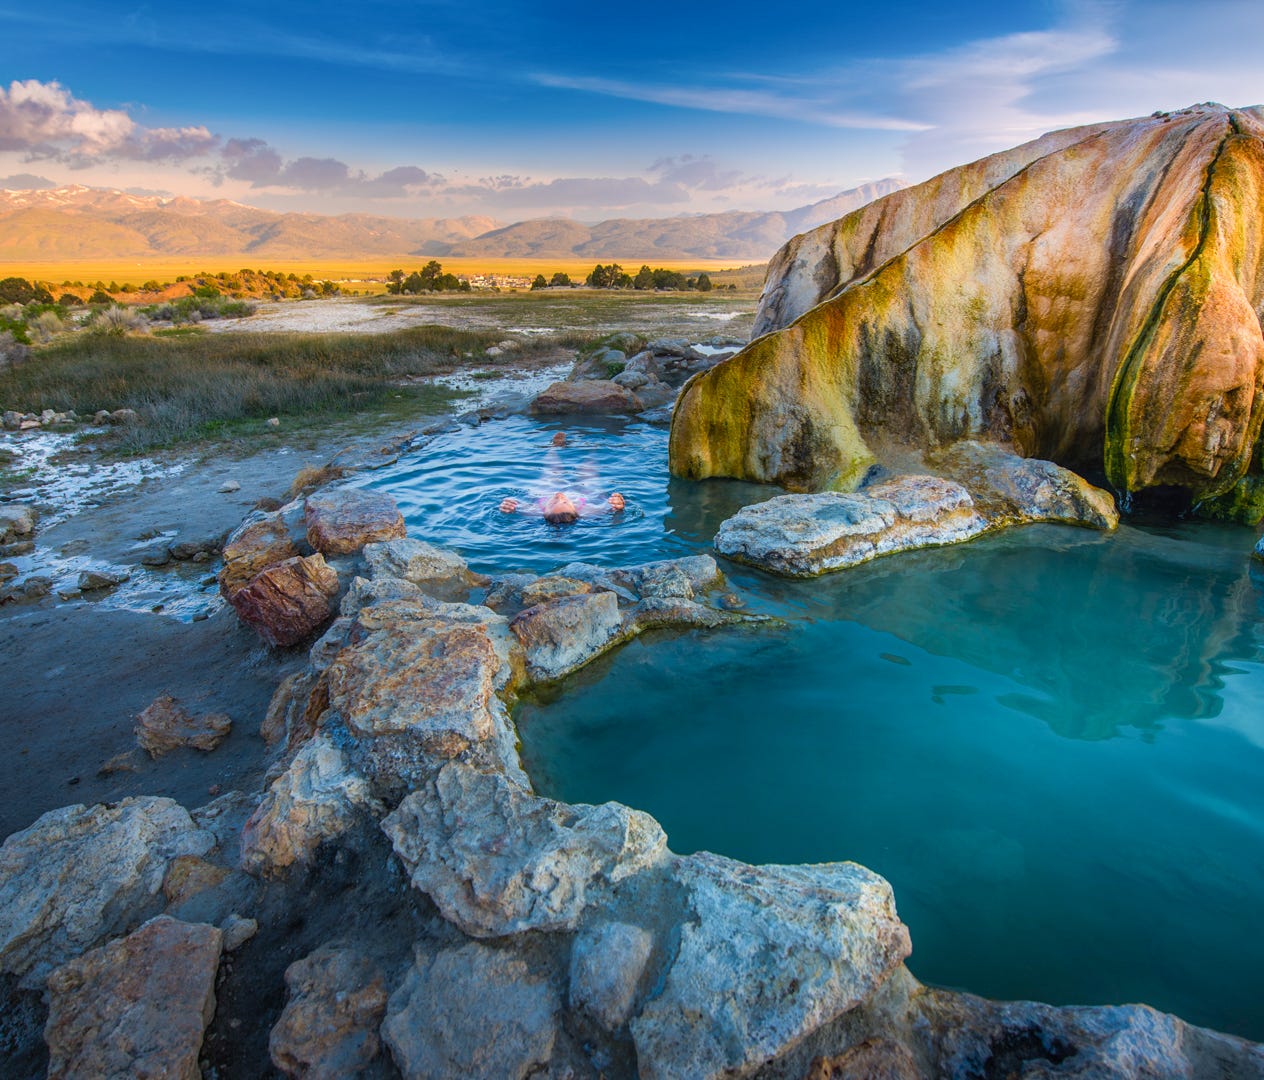 Travertine Hot Springs (Bridgeport, Calif.): This is one of the easiest natural hot springs to get to, and Travertine's beauty is not limited by its accessibility. A great pit stop for Angelenos en route to Lake Tahoe or Mammoth Mountain, this free r